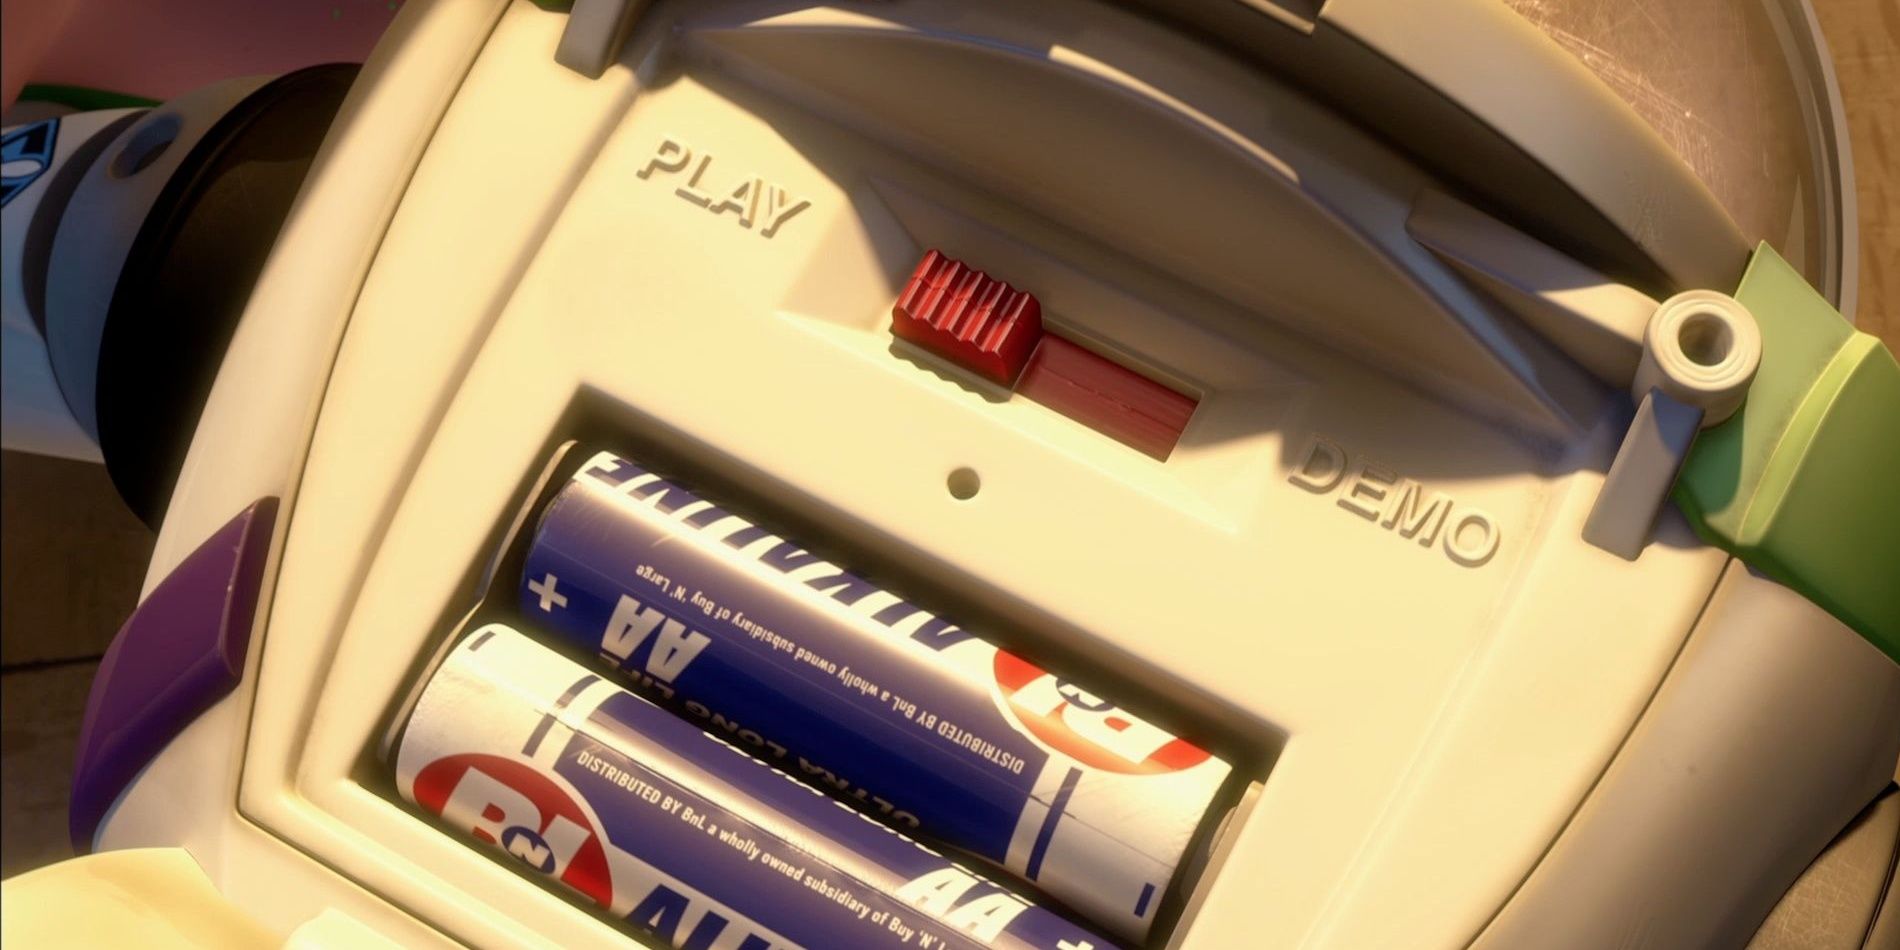 Buzz Lightyear's batteries are shown in Toy Story 3, revealing the Buy N Large logo from WALL-E